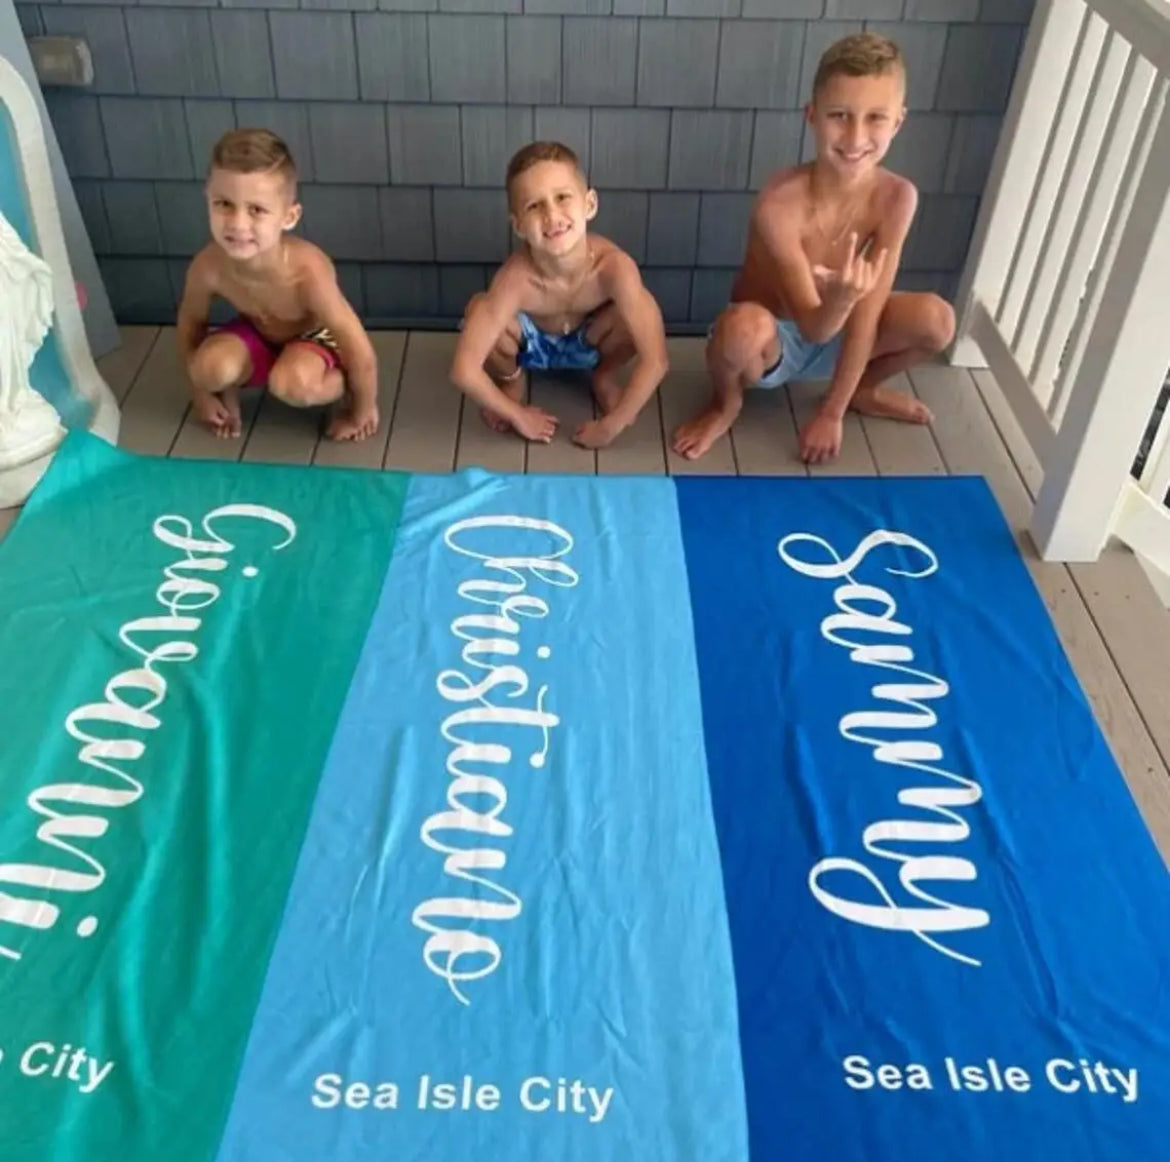 bachelorette towel,beach blanket,birthday gifts for,bridesmaid gifts,custom towels,gift for couples,gift for her,gift for him,monogrammed gifts,personalized gift,personalizedtowel,summer gifts,turkish beach towel best beach towel,best birthday gift,best gift,bridesmaid gift,custom beach towels,customized towel,custom name towel,custom towel,personalized beach,personalized gift,personalized towel,personalized towels,vacation gift bachelorette towel